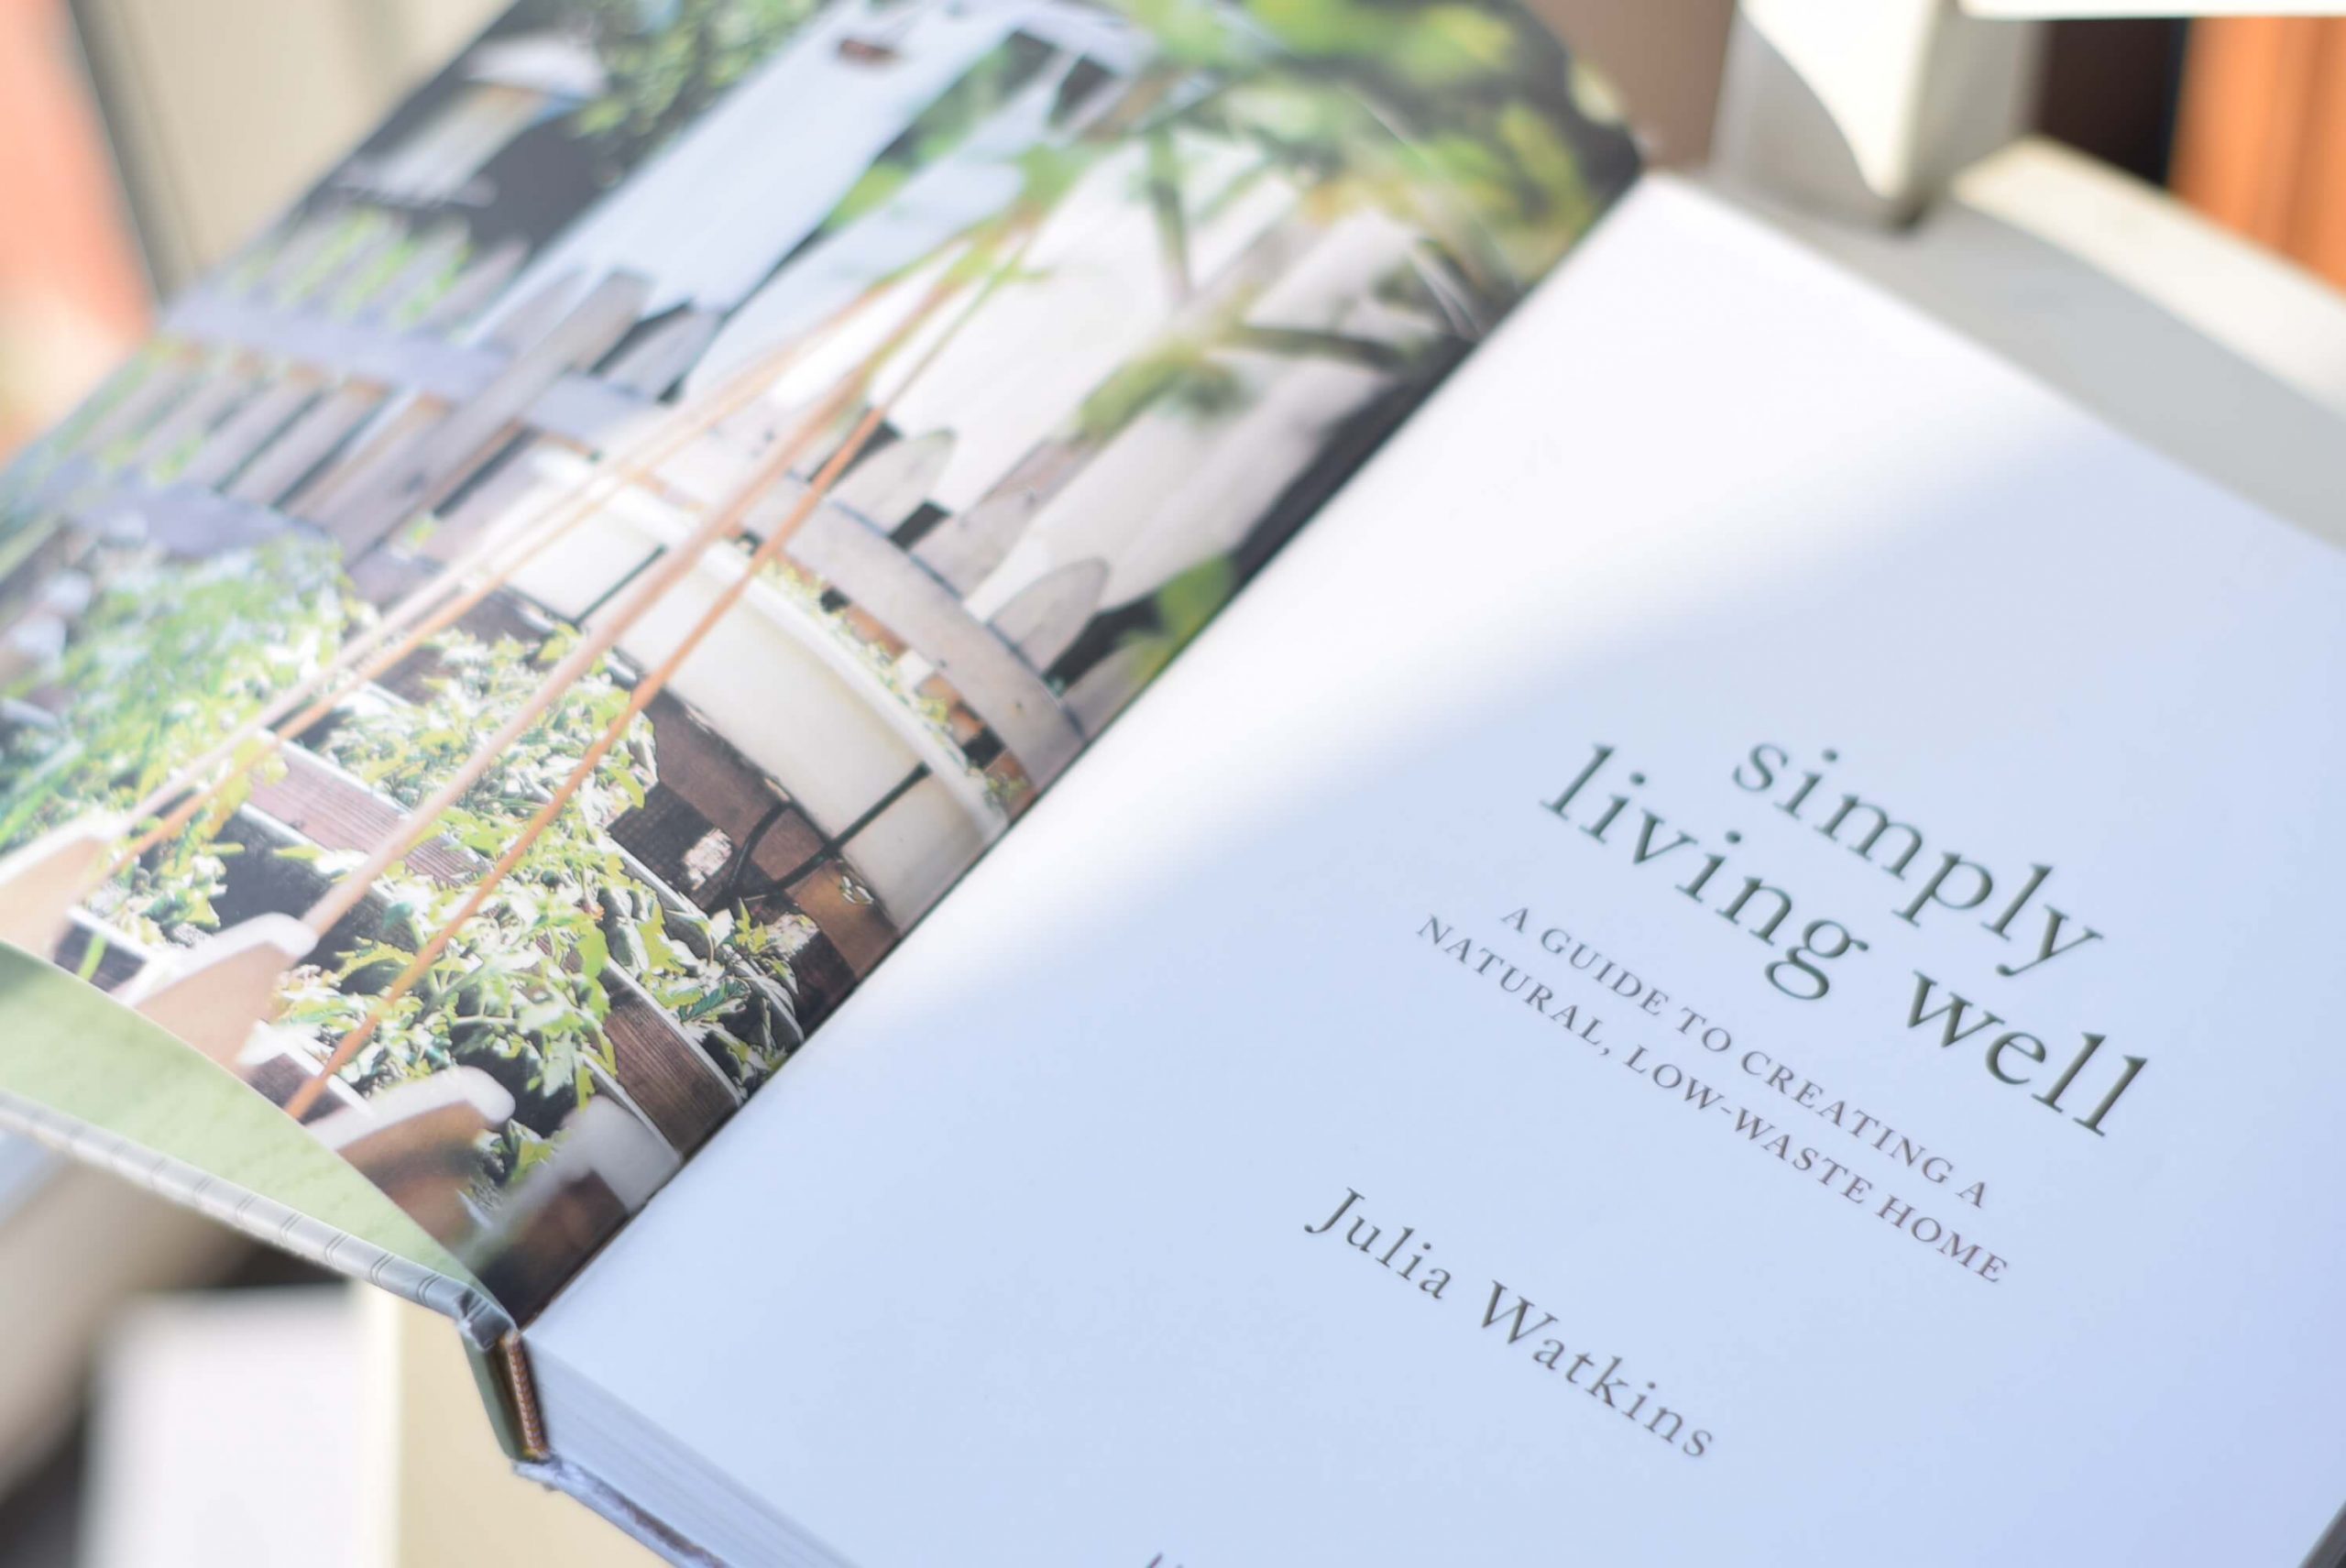 The book Simply Living Well by Julia Watkins opened to one of it's first pages. The left page has a picture of a garden and on the right is written text.